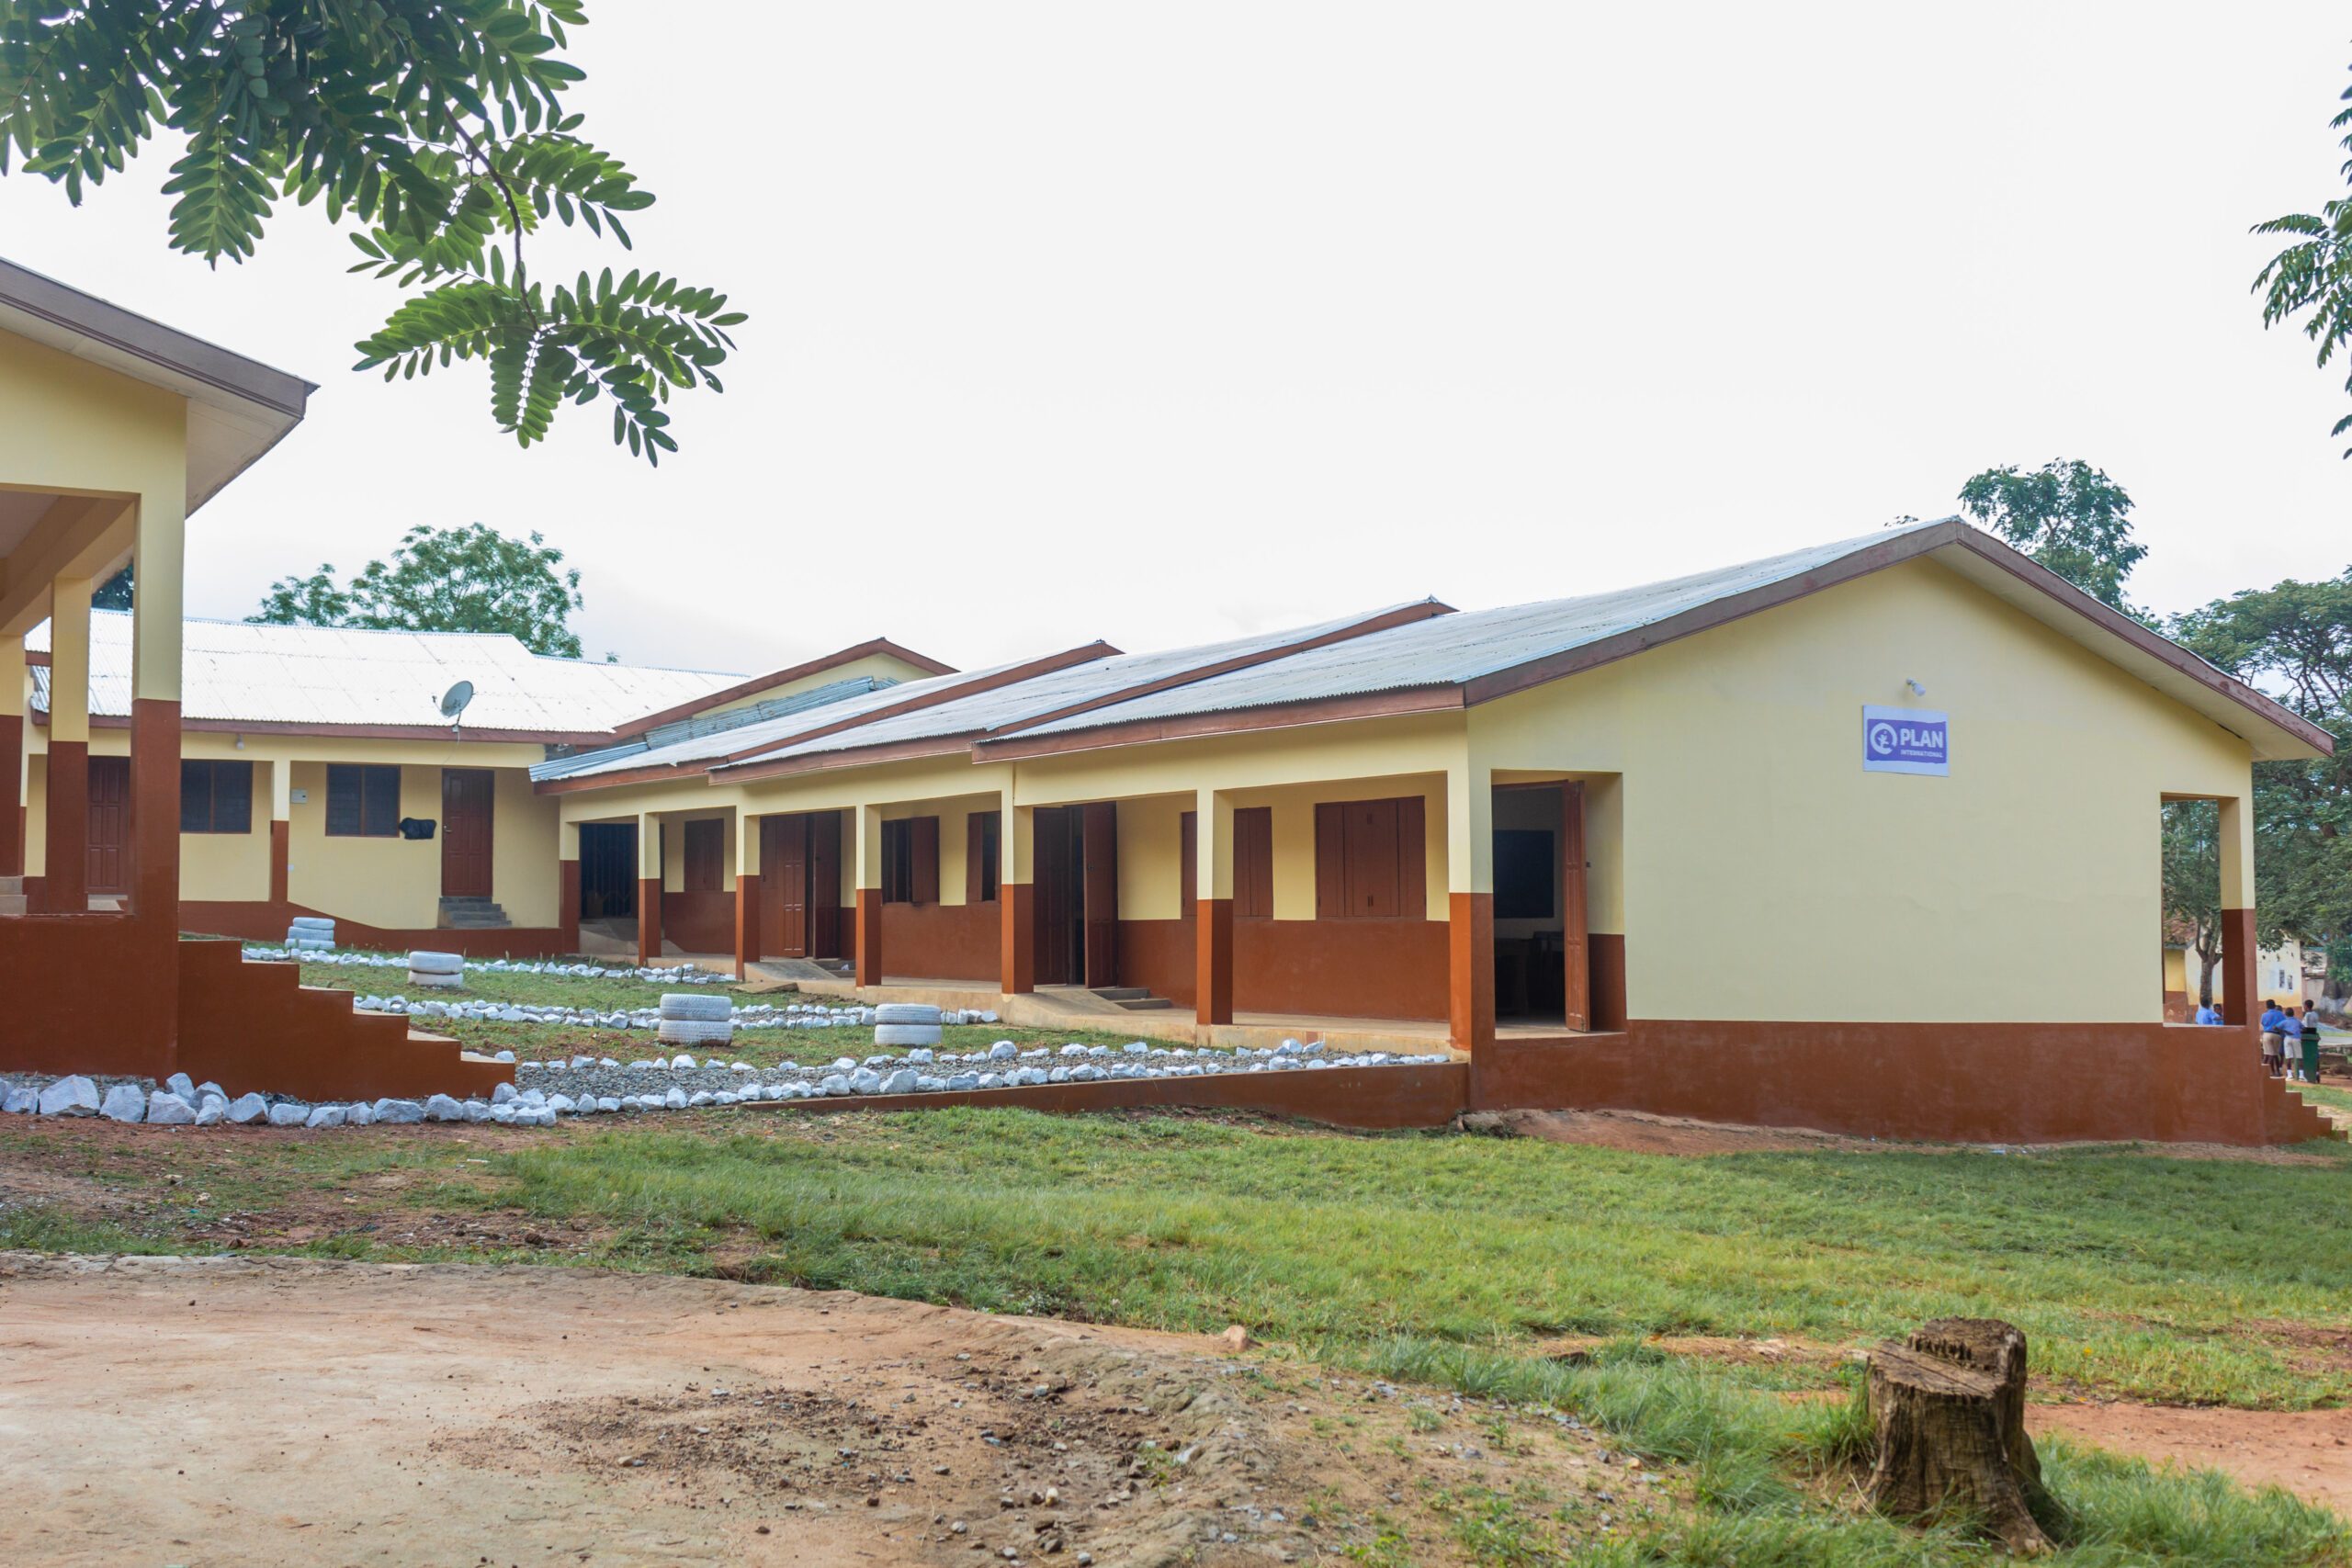 The newly built school building